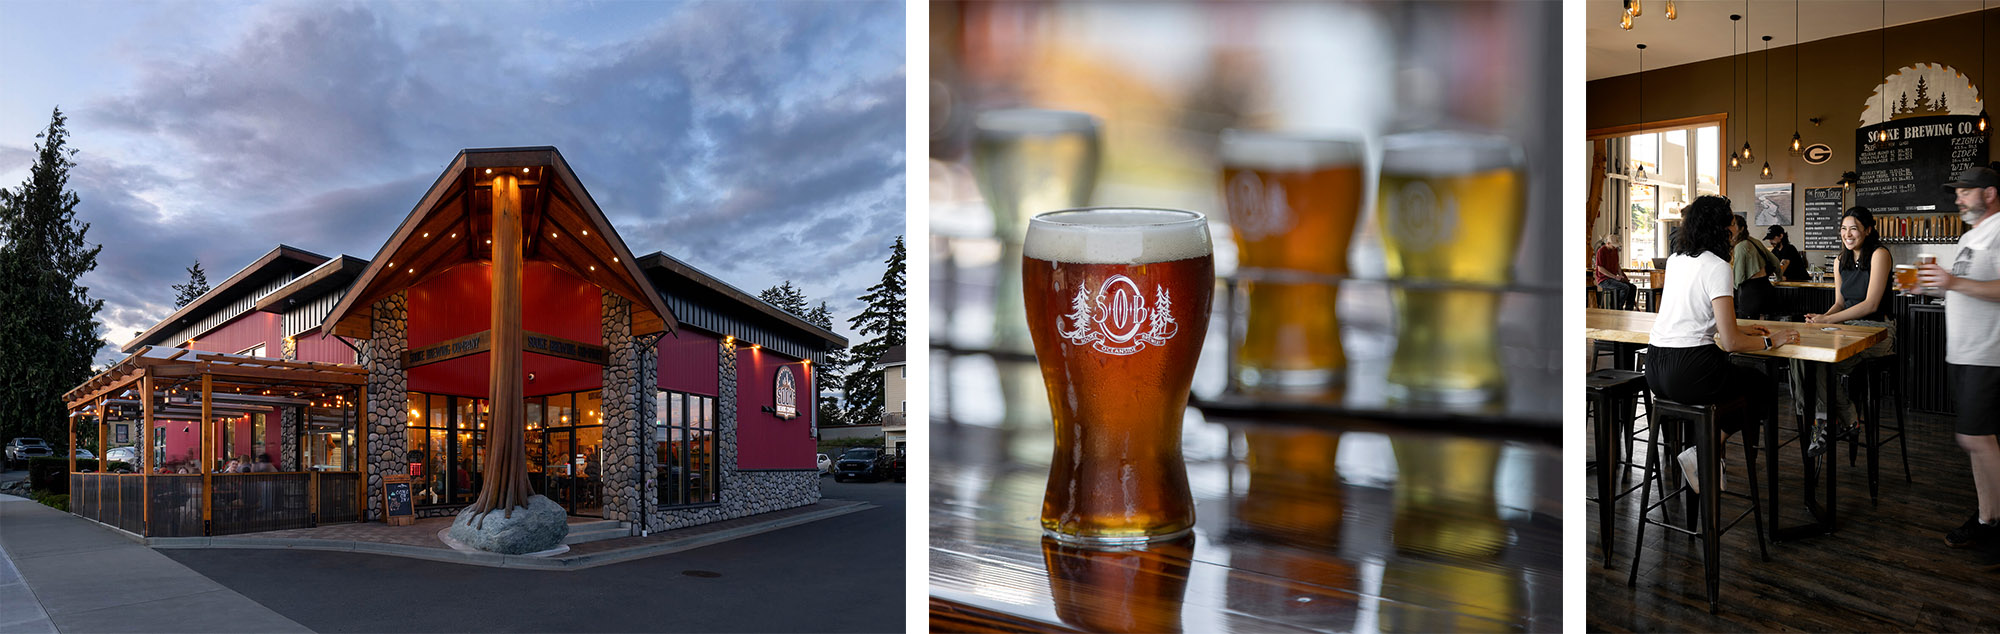 Restaurant and product photography at the Sooke Ocanside Brewery.